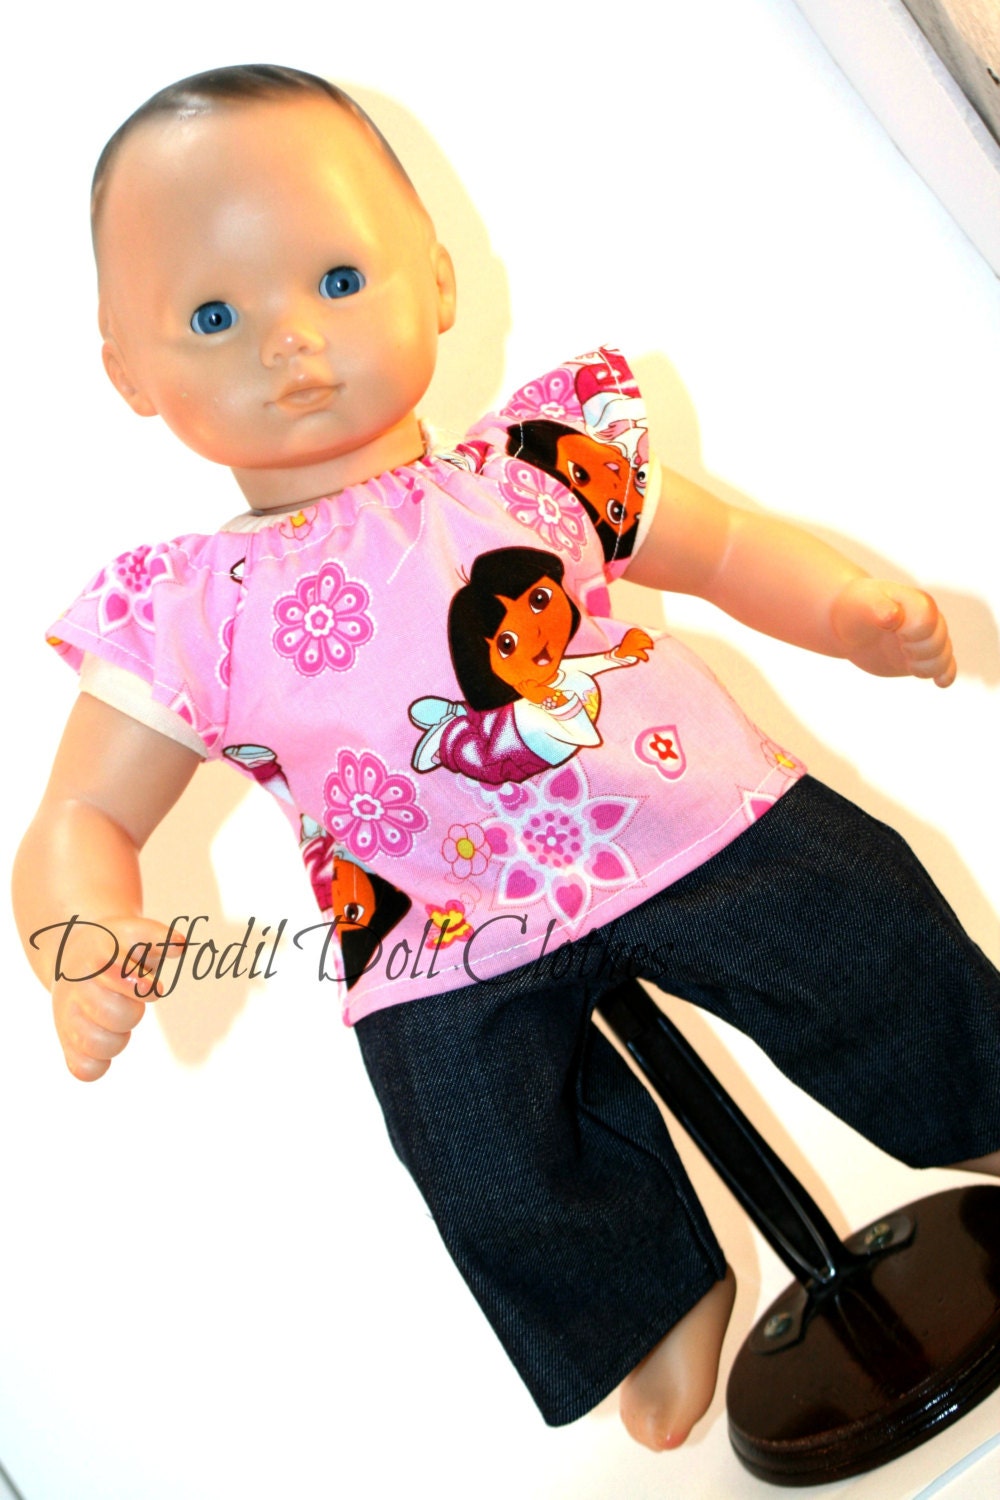 Baby Doll Graphics and Gif Animation for Facebook